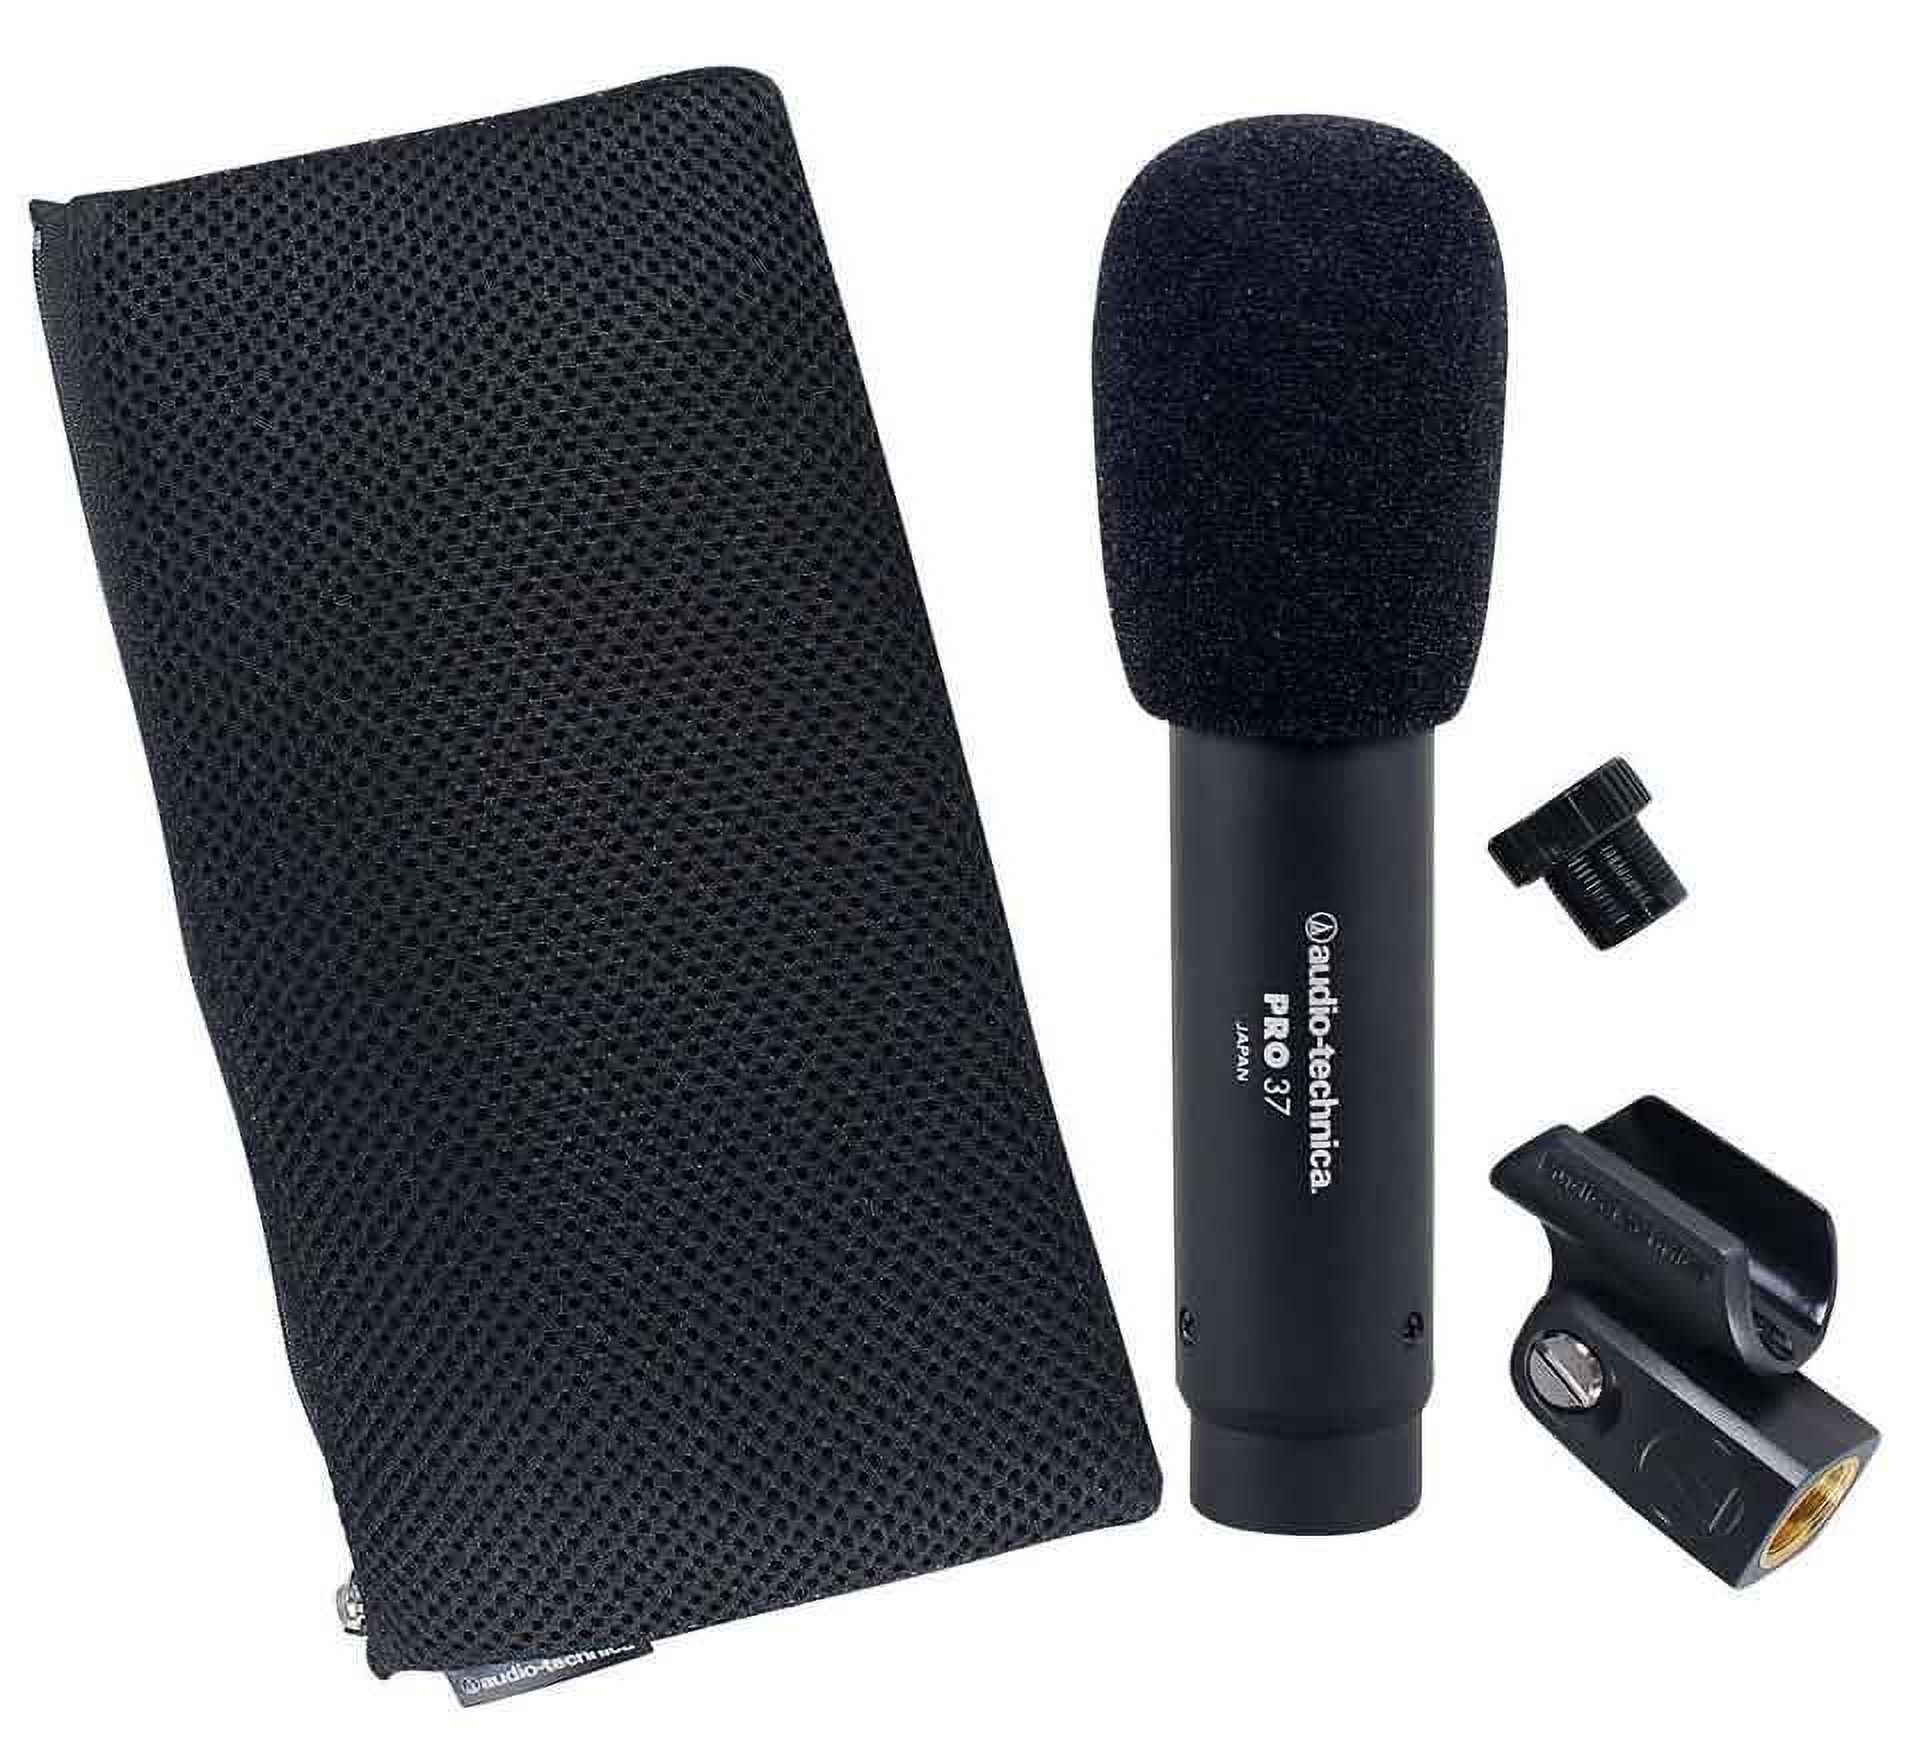 Audio Technica PRO37 Diaphragm Condenser Microphone PRO 37+Mic Stand+Iso Shield - image 2 of 6